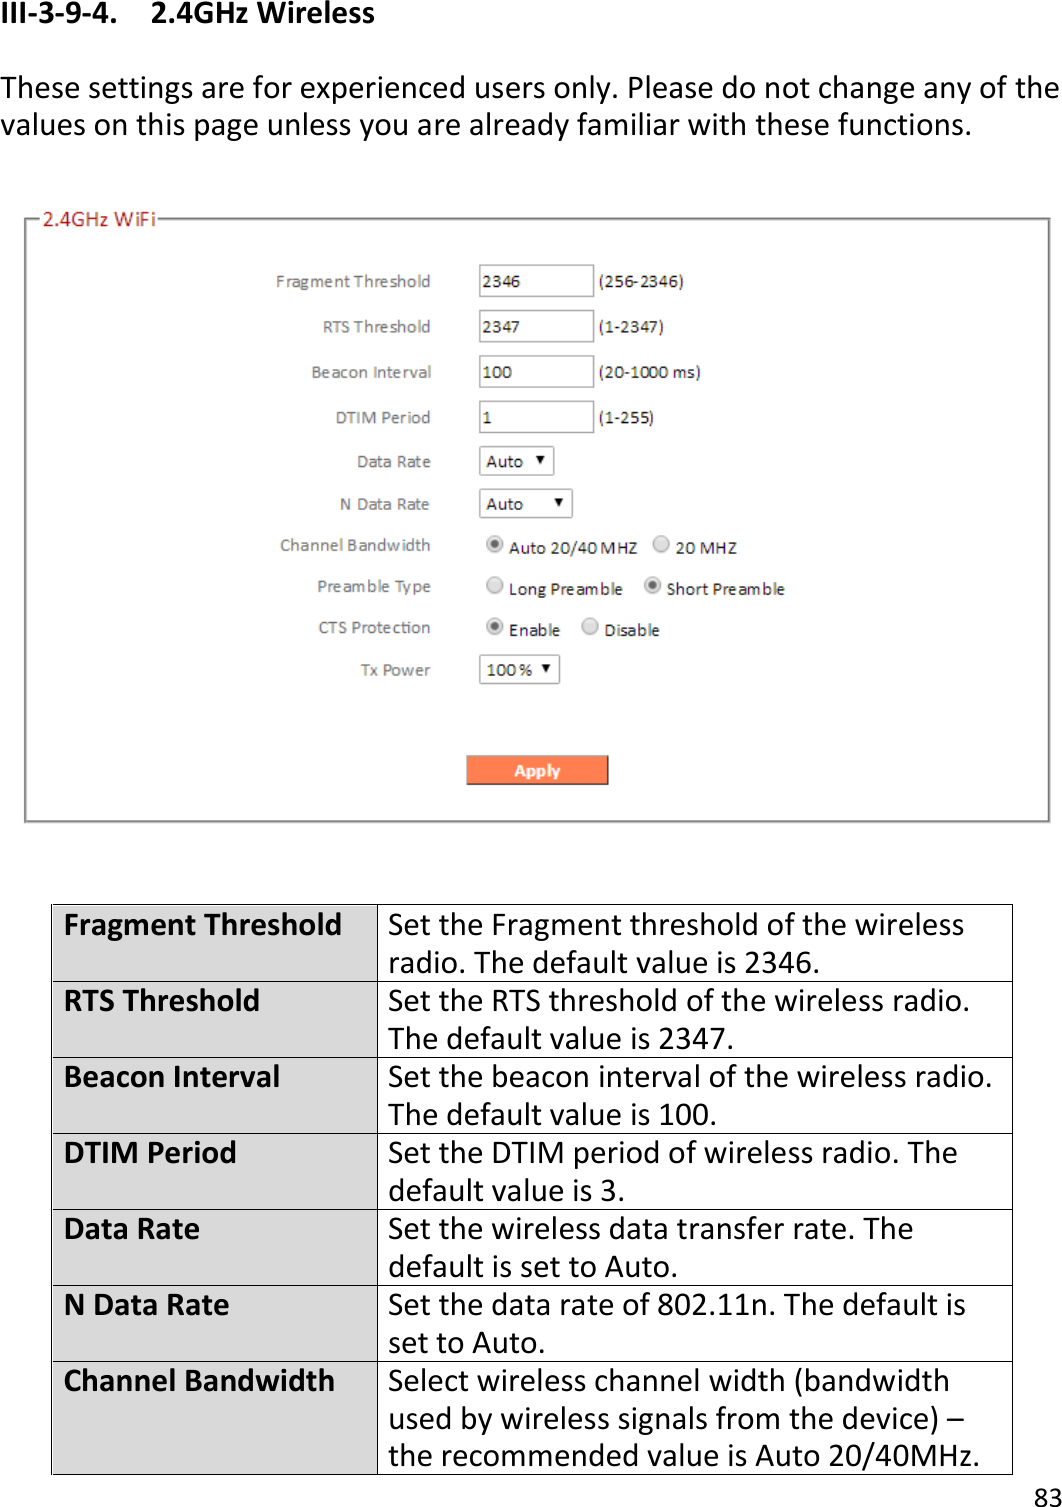 83   III-3-9-4.  2.4GHz Wireless  These settings are for experienced users only. Please do not change any of the values on this page unless you are already familiar with these functions.    Fragment Threshold Set the Fragment threshold of the wireless radio. The default value is 2346. RTS Threshold Set the RTS threshold of the wireless radio. The default value is 2347. Beacon Interval Set the beacon interval of the wireless radio. The default value is 100. DTIM Period Set the DTIM period of wireless radio. The default value is 3. Data Rate Set the wireless data transfer rate. The default is set to Auto. N Data Rate Set the data rate of 802.11n. The default is set to Auto. Channel Bandwidth Select wireless channel width (bandwidth used by wireless signals from the device) – the recommended value is Auto 20/40MHz. 